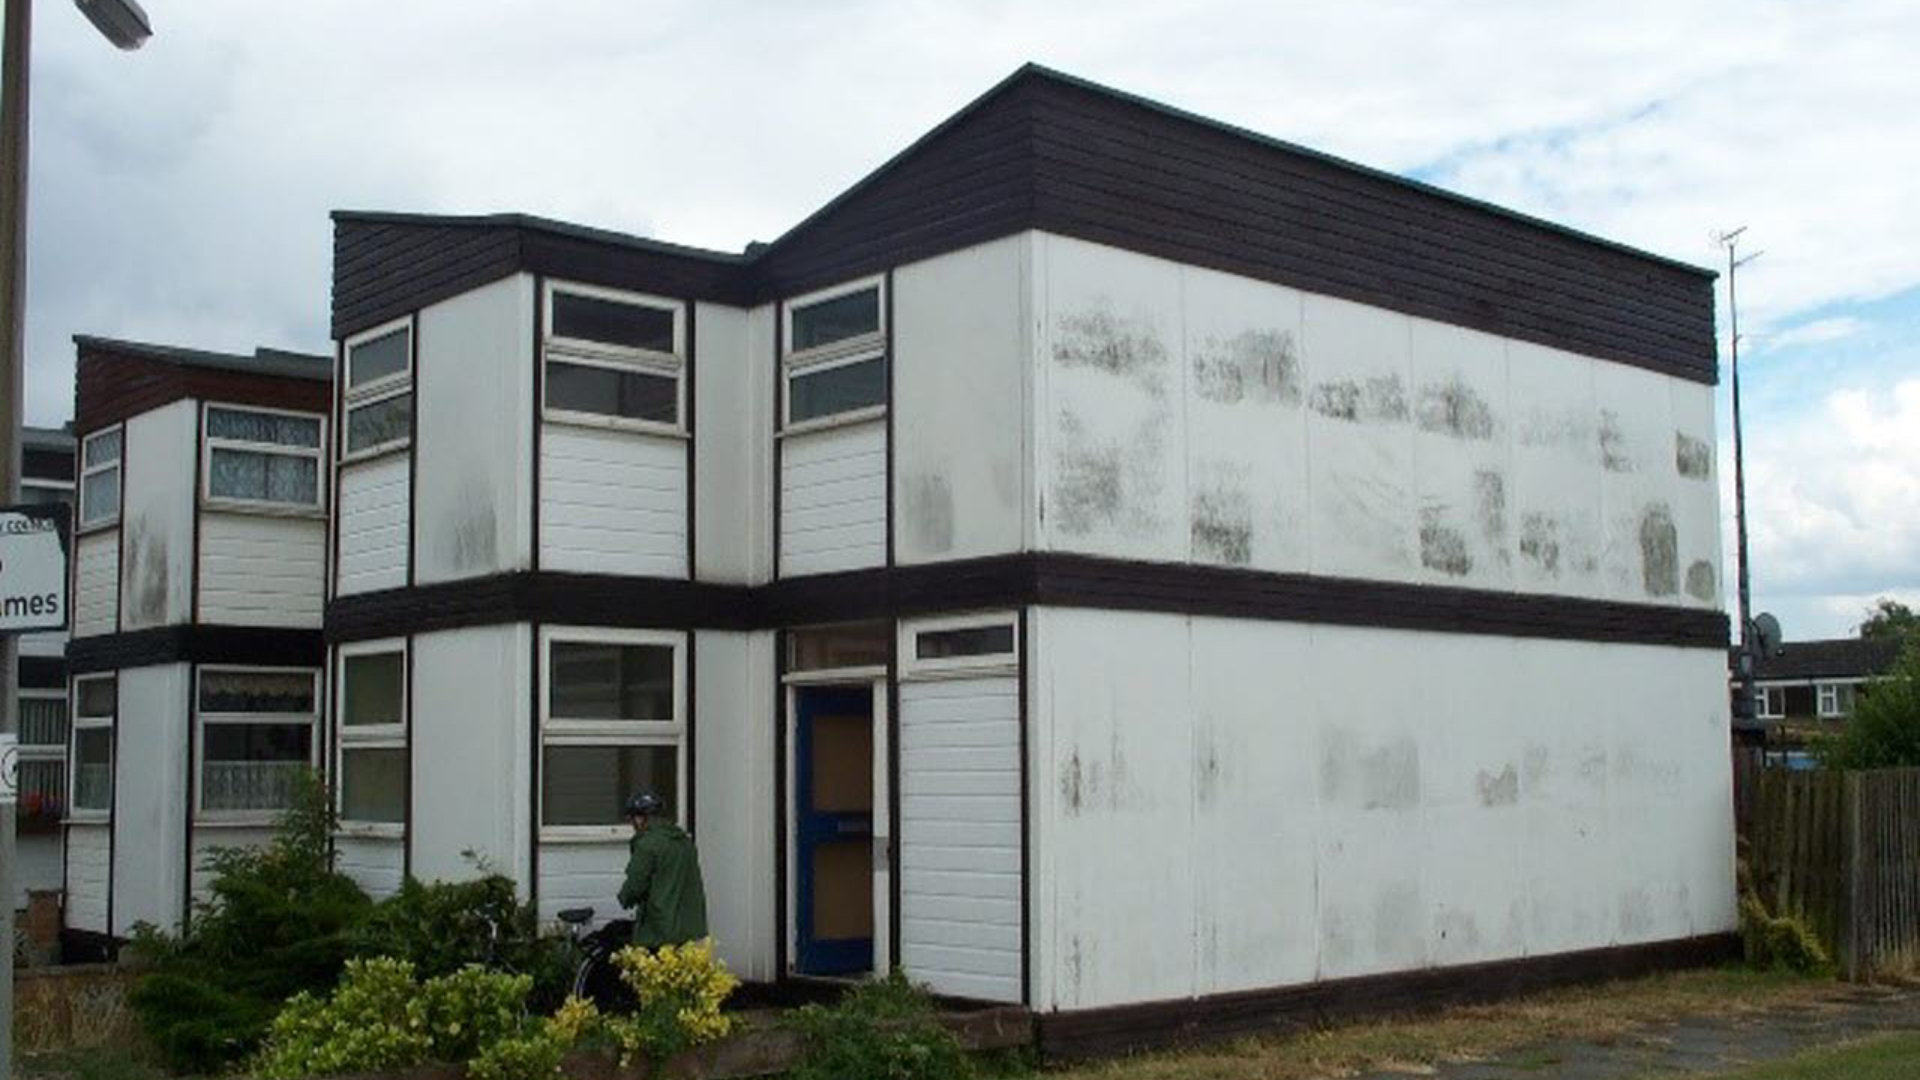 Prefabricated residential property with extensive use of asbestos both internally and externally